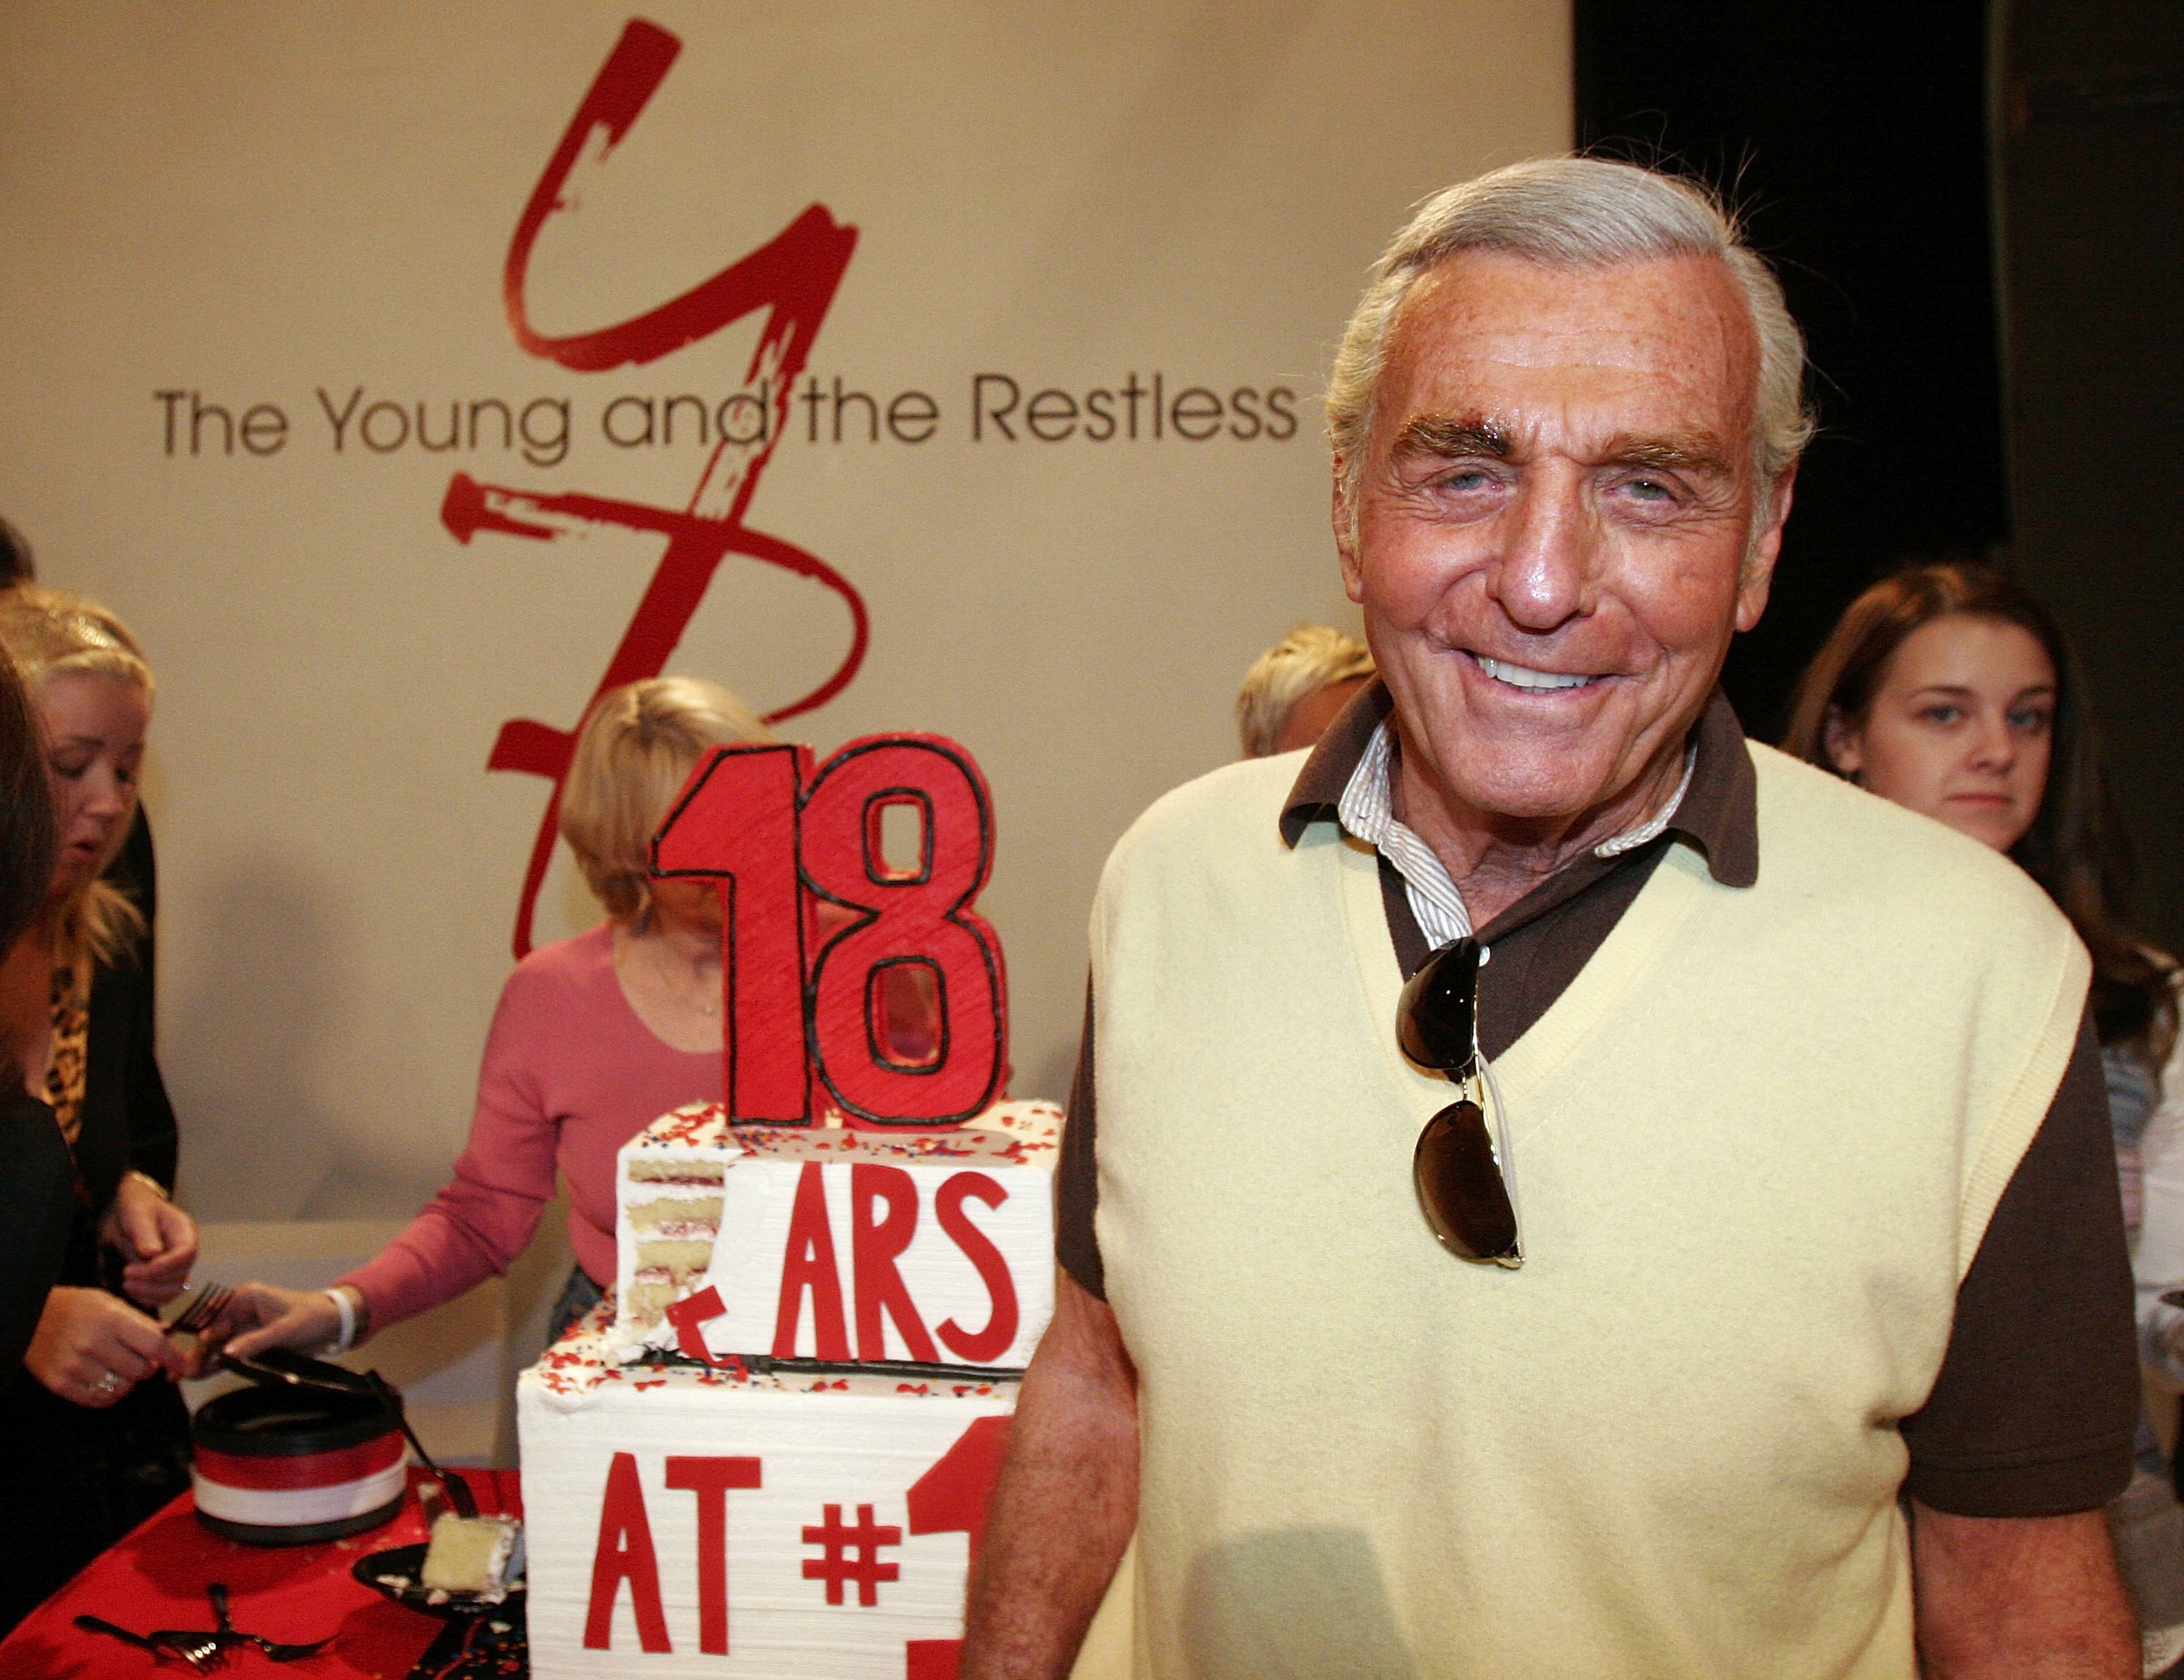 'The Young and the Restless' actor Jerry Douglas wearing a brown and white shirt, standing beside a cake.